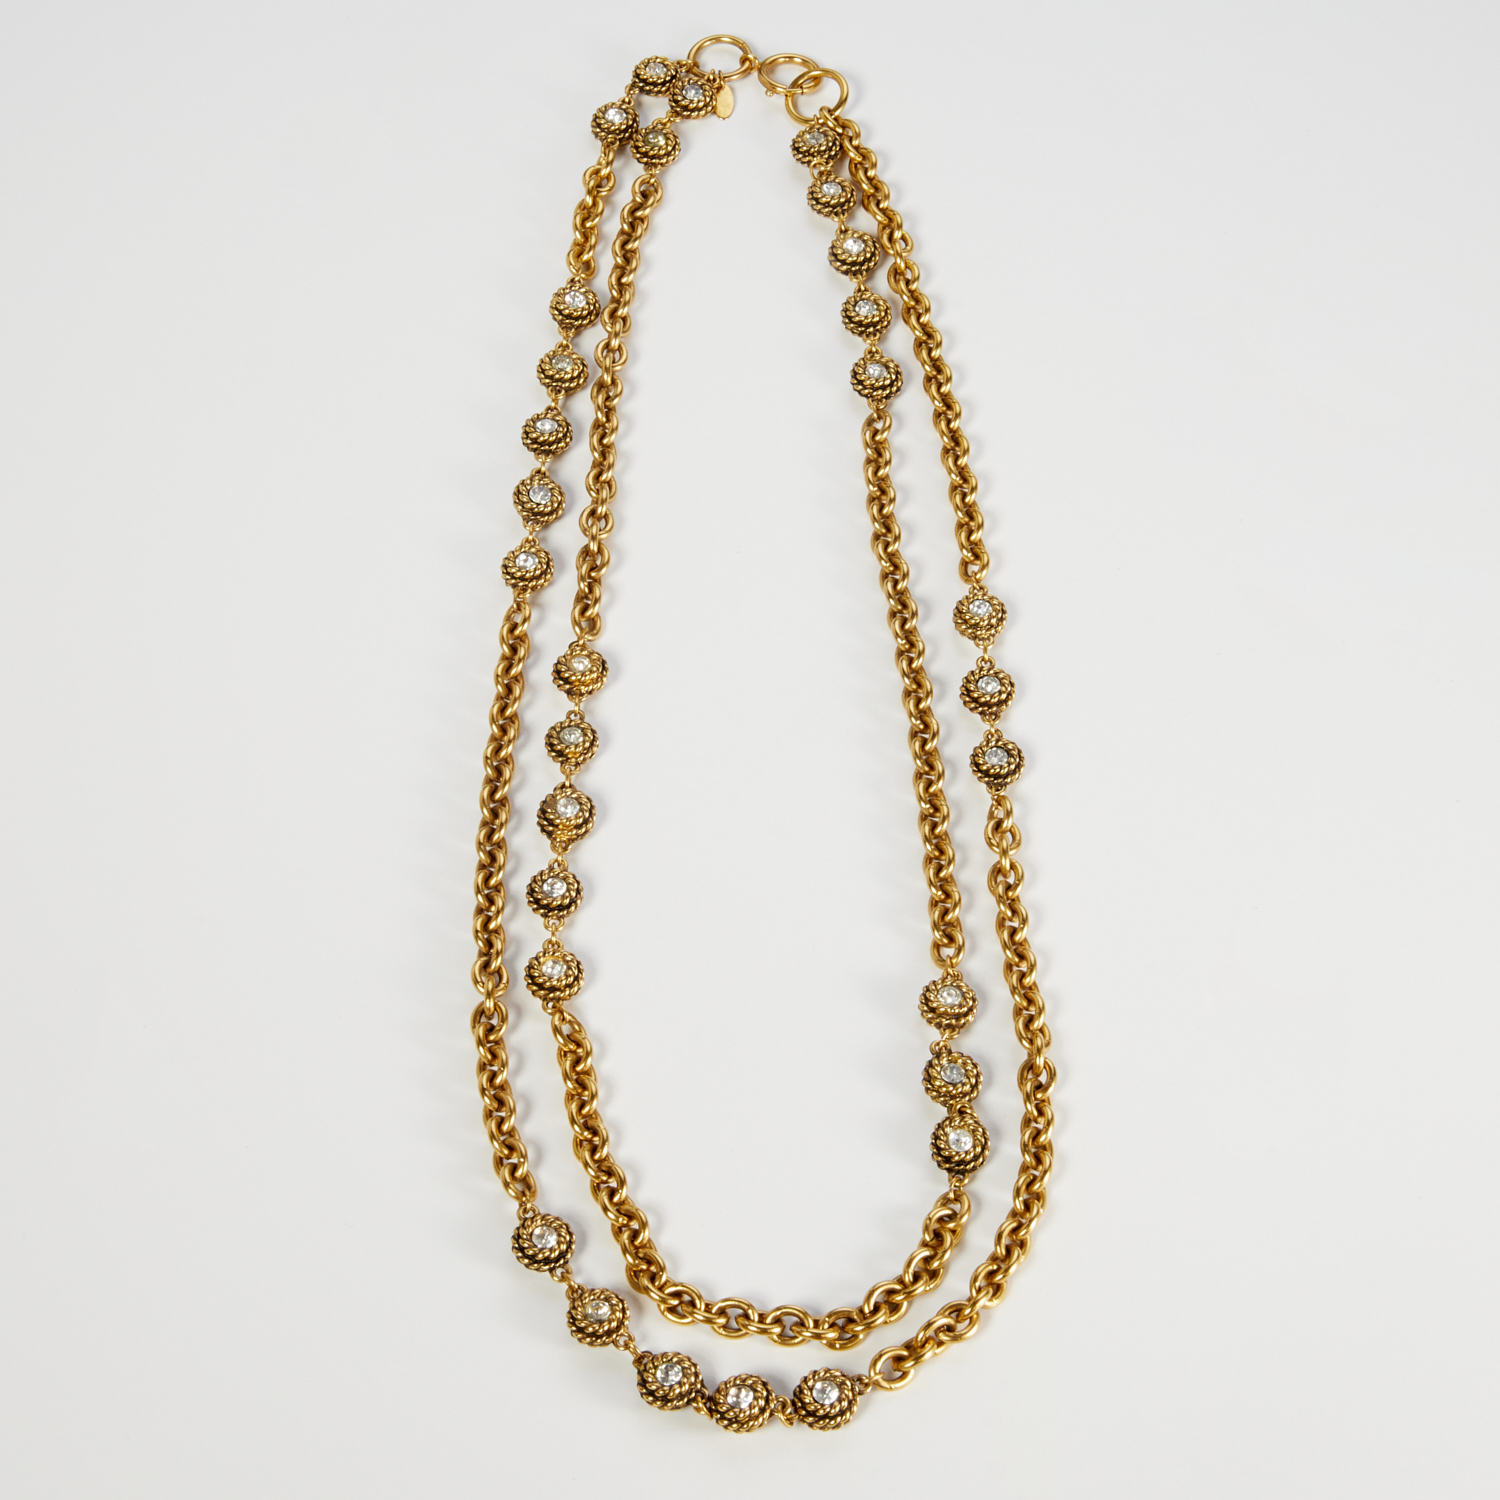 VINTAGE CHANEL FRANCE DOUBLE STRAND 2fae53